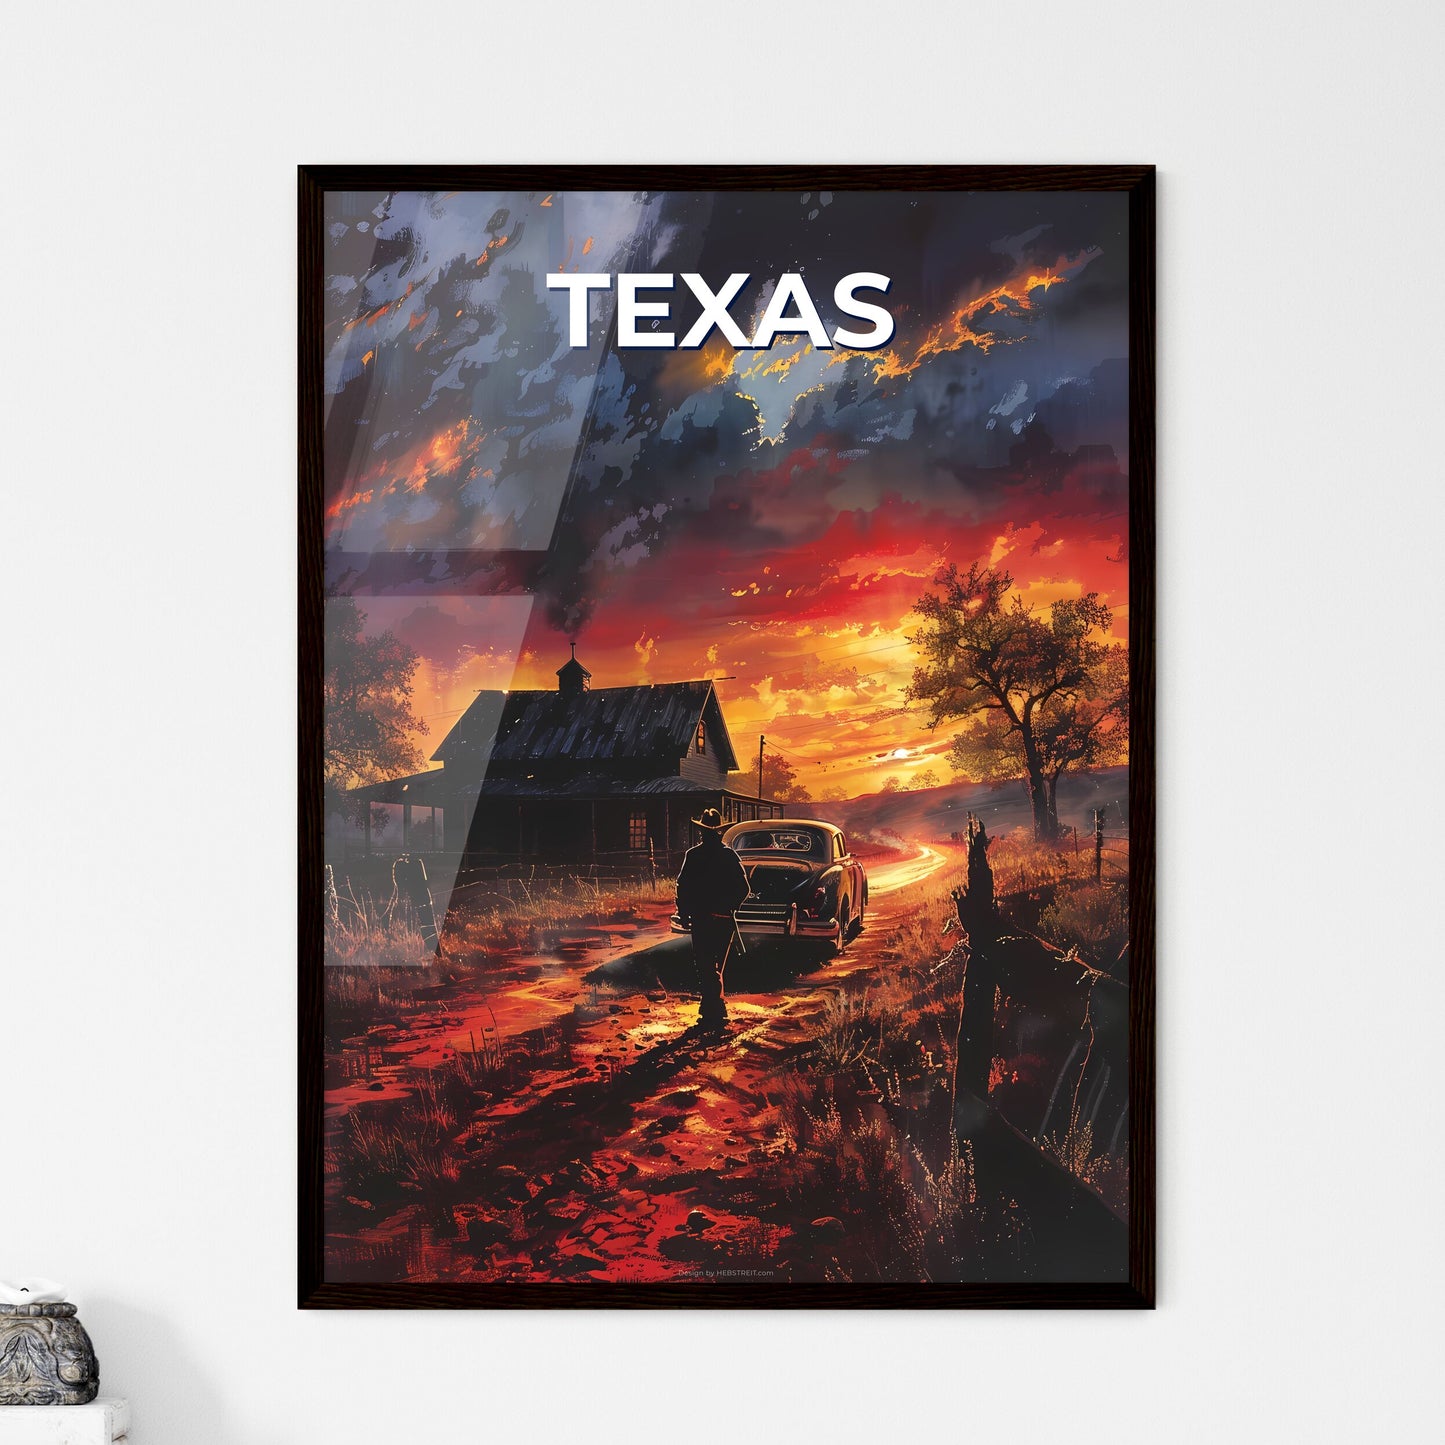 Artful Texas Landscape: Vibrant Painting Depicting Man on Dirt Road, Car, and House